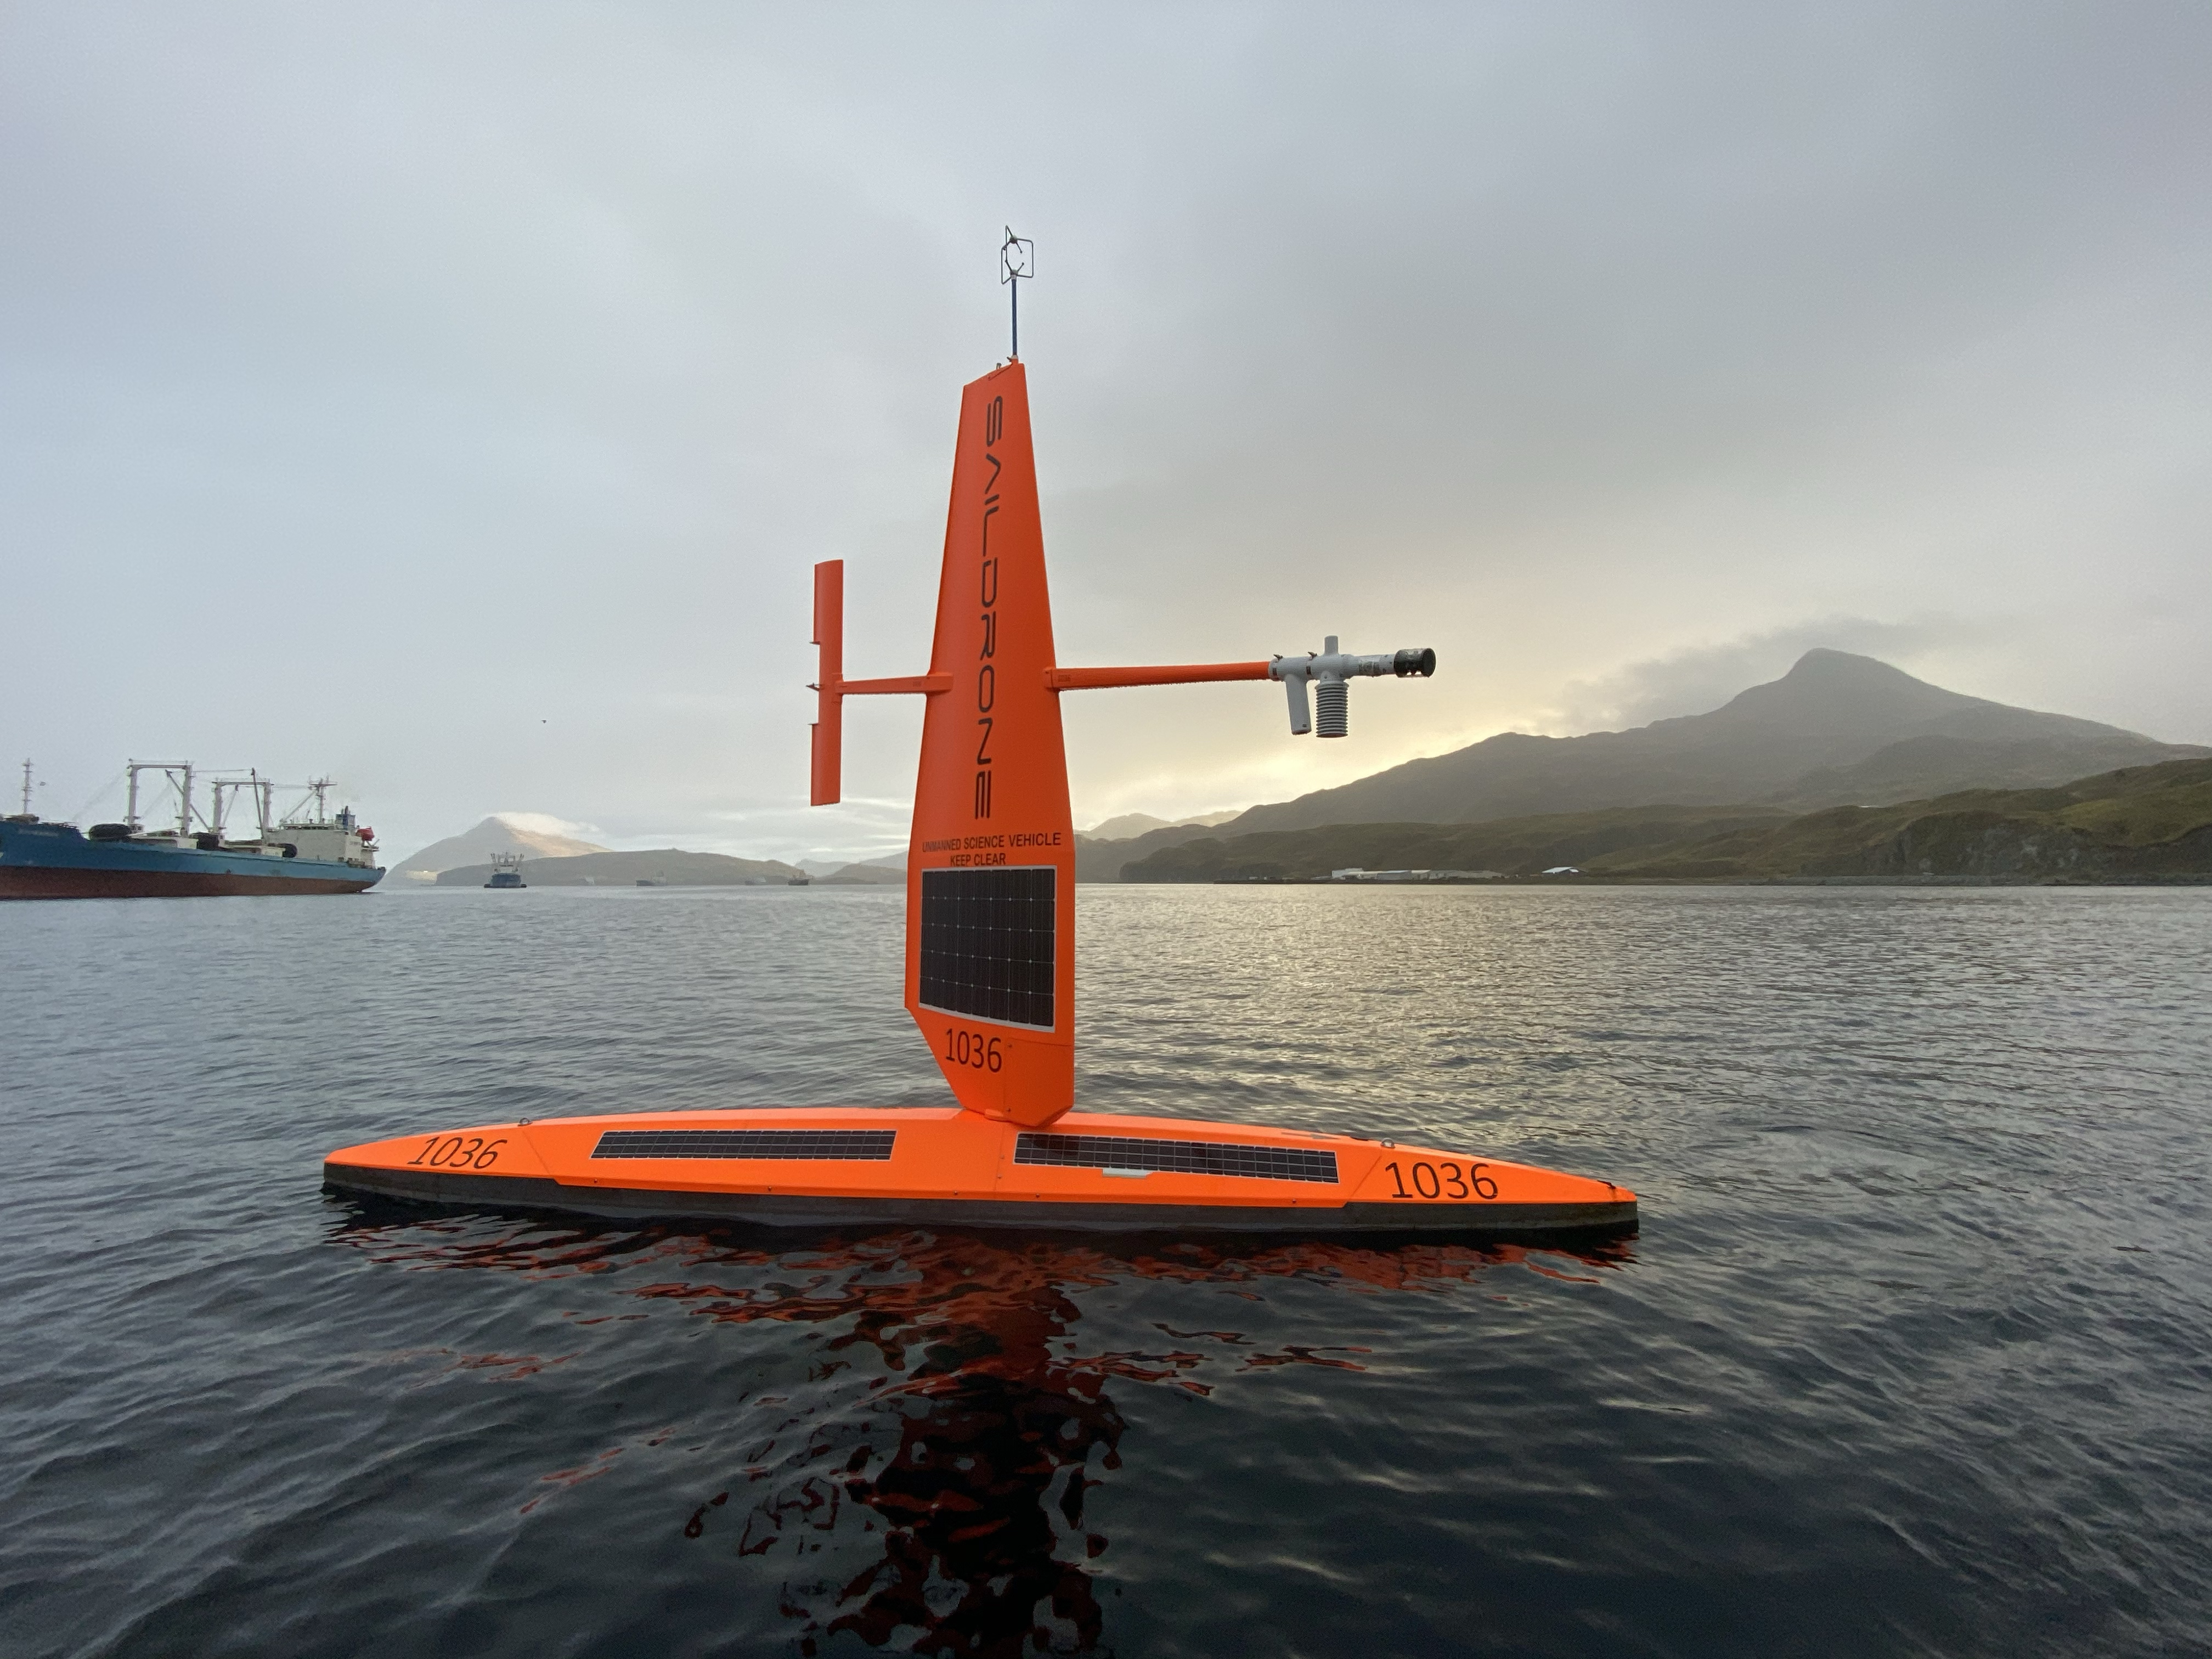 A saildrone is recovered in Dutch Harbor, AK after the 2019 NOAA Arctic missions